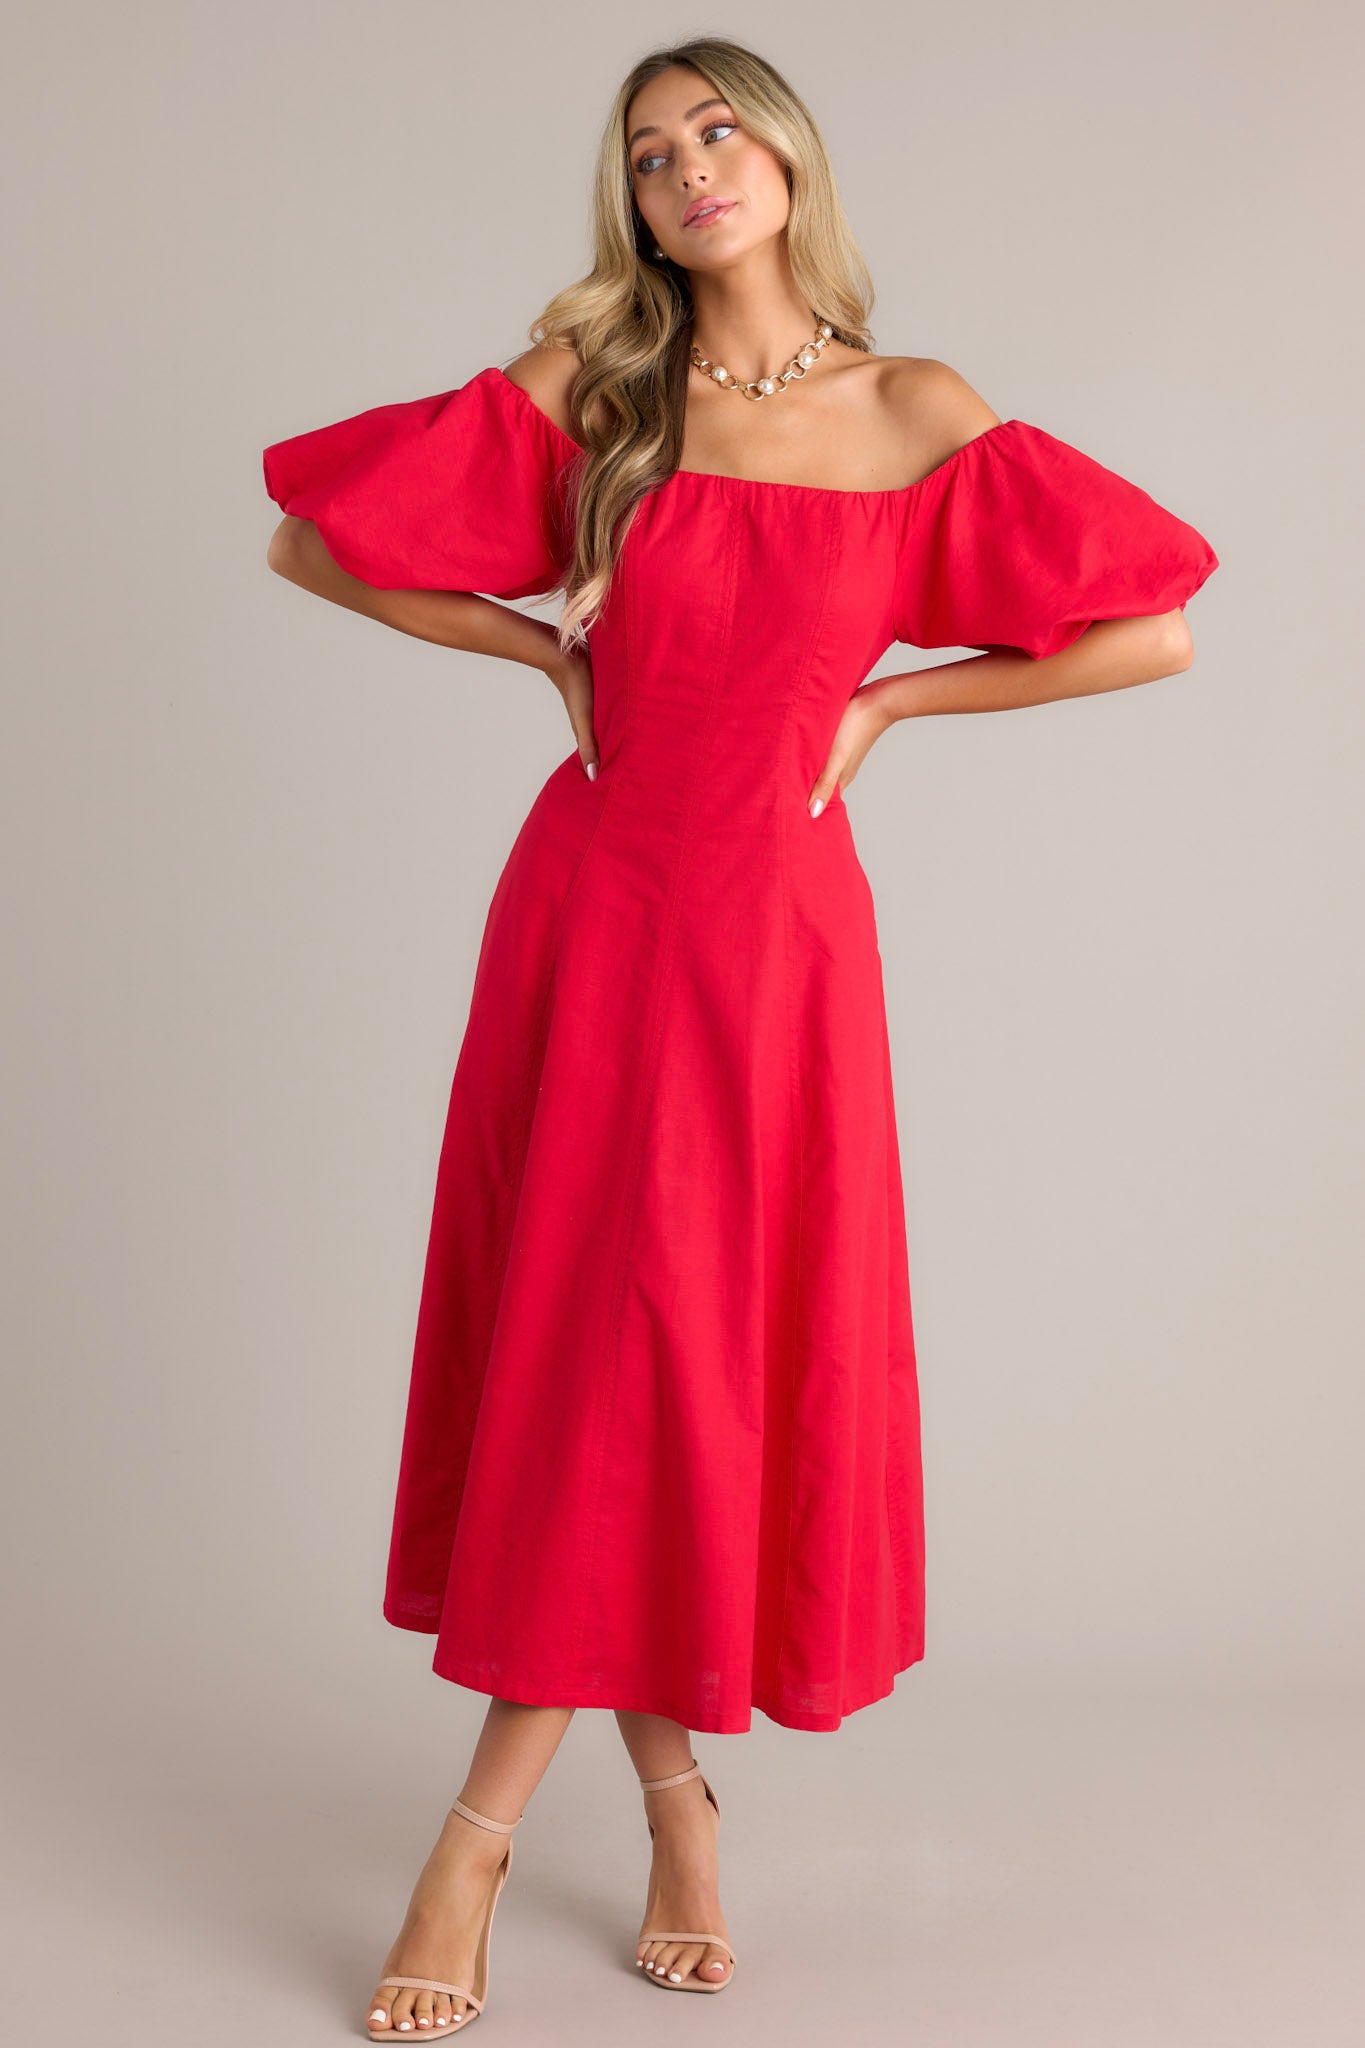 Off-the-shoulder red dress with puffed sleeves, a fitted bodice, and a flowy, ankle-length skirt.